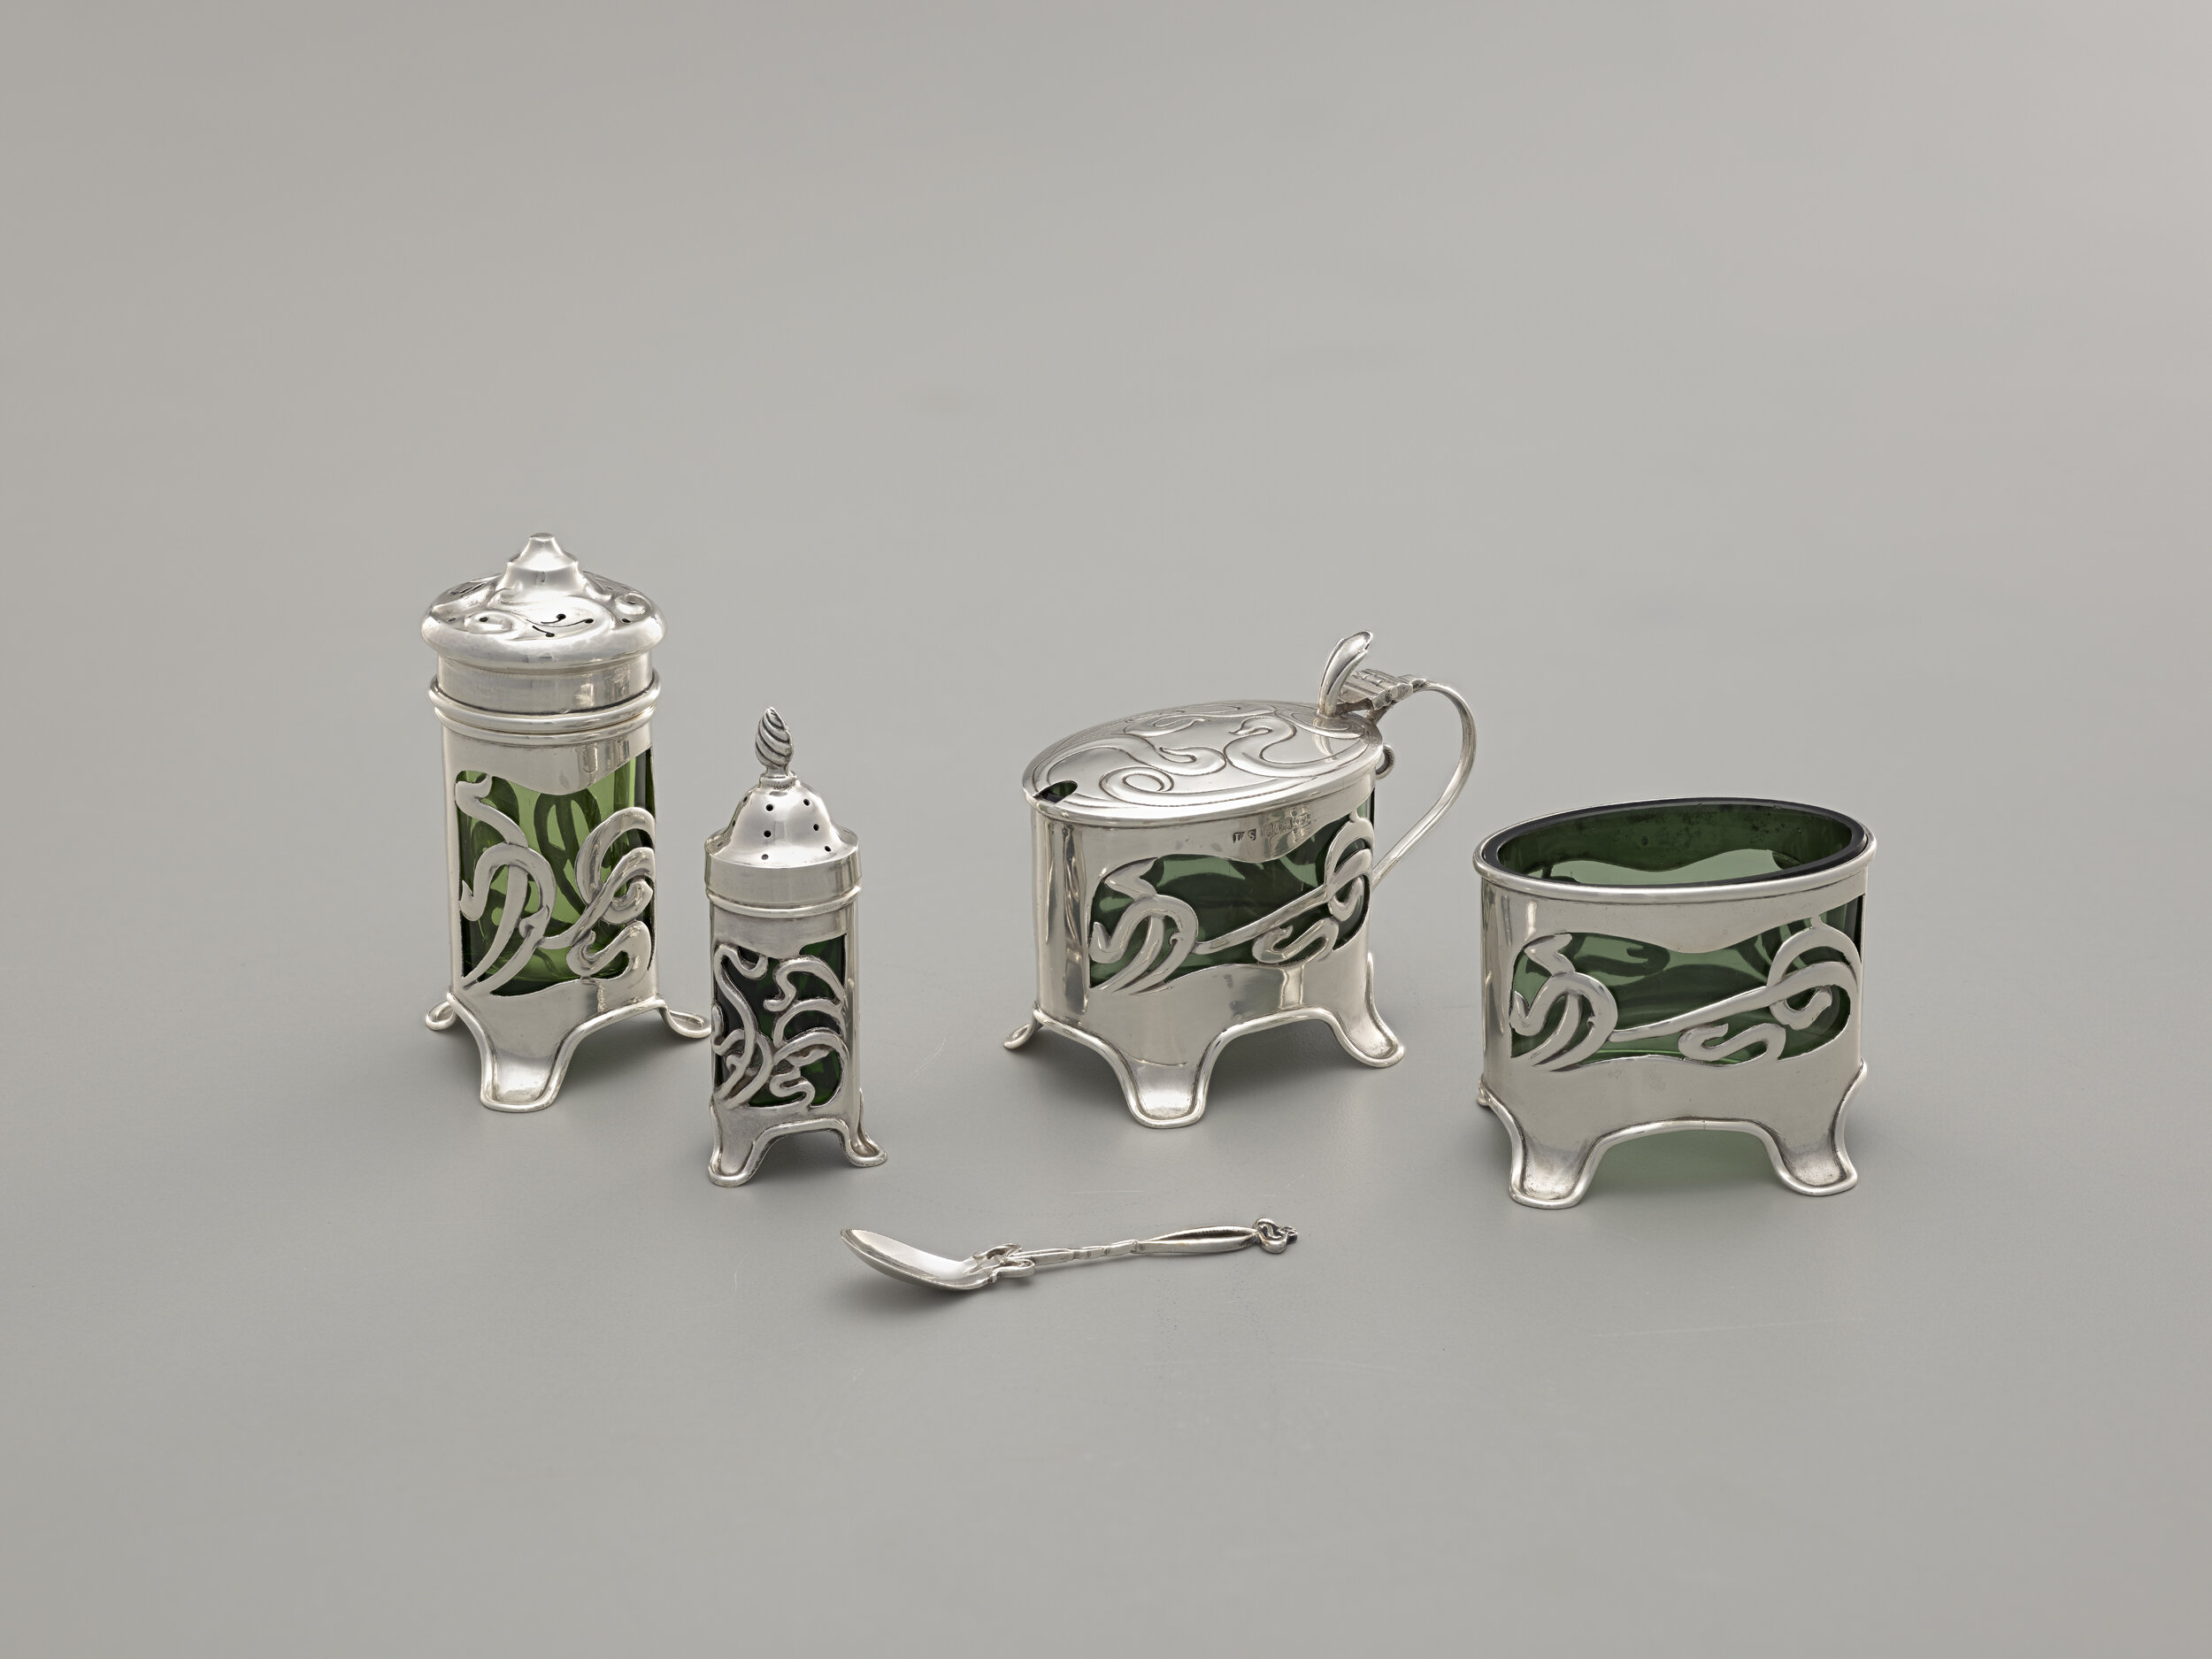  Levi &amp; Salaman, Condiment Set, 1903, sterling silver, The Margo Grant Walsh 20th Century Silver and Metalworks Collection, public domain, 2001.129.17a-k 